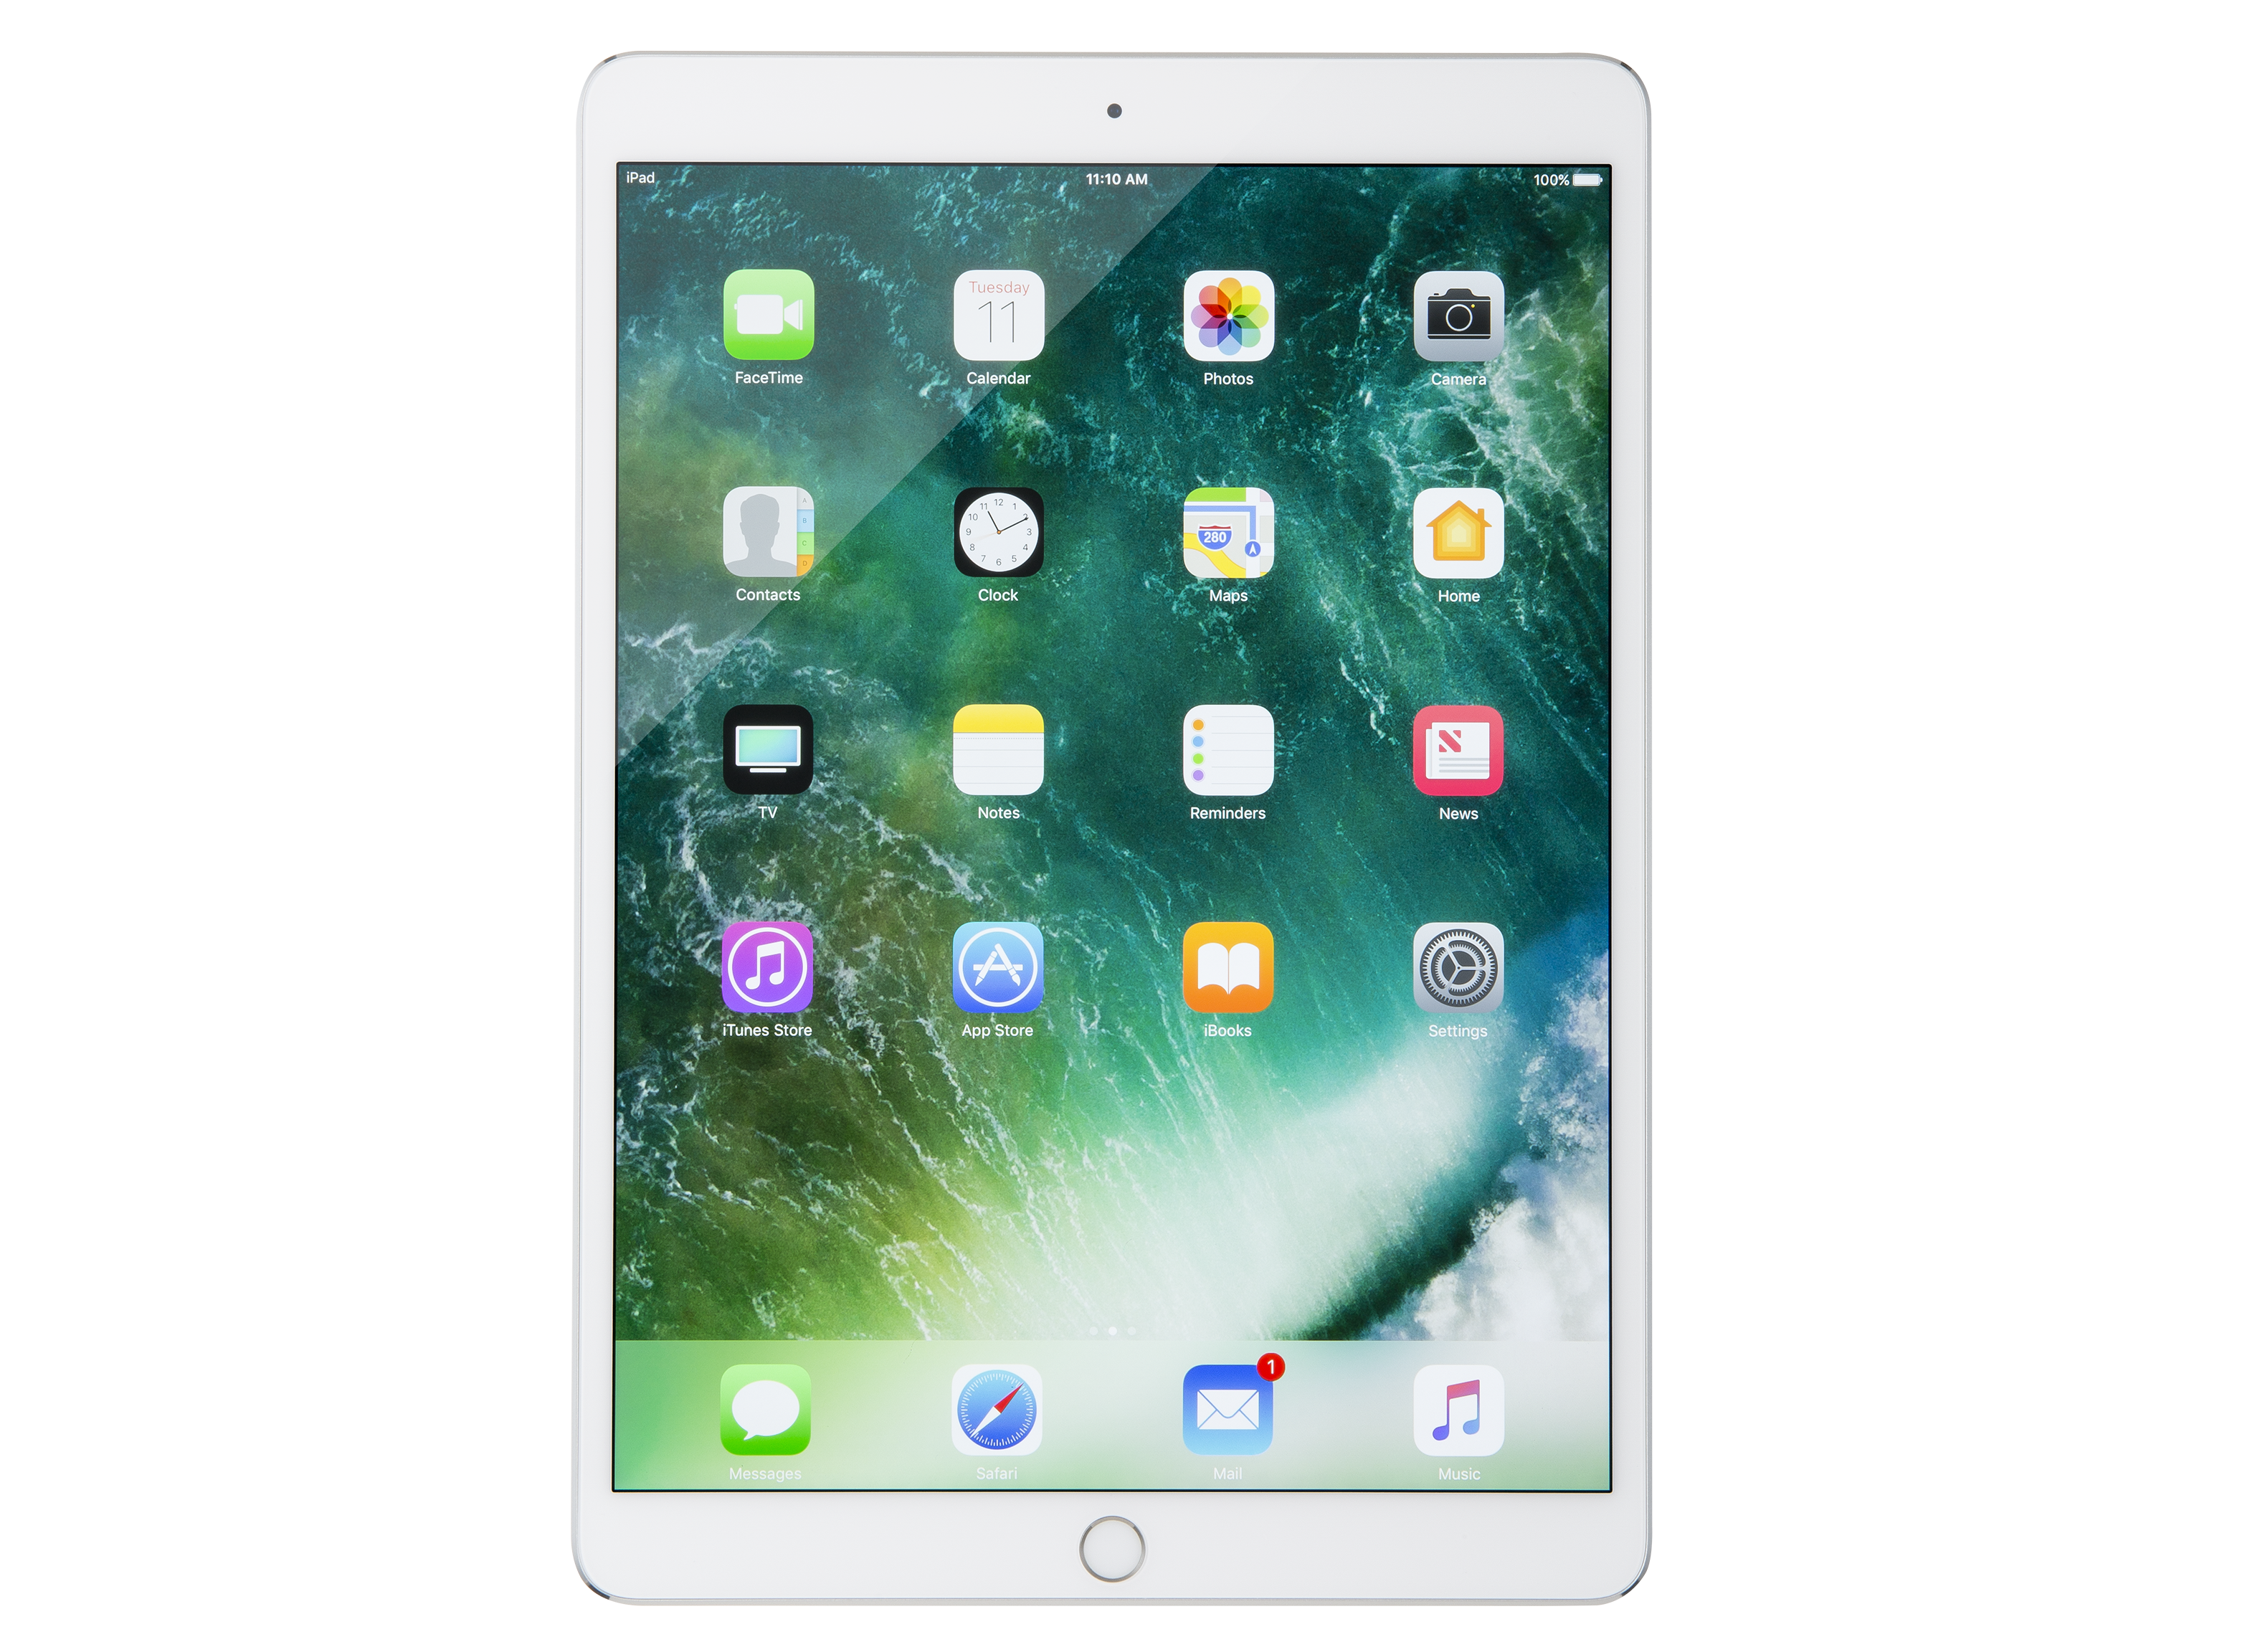 Apple iPad Pro 10.5 (64GB) Tablet Review - Consumer Reports